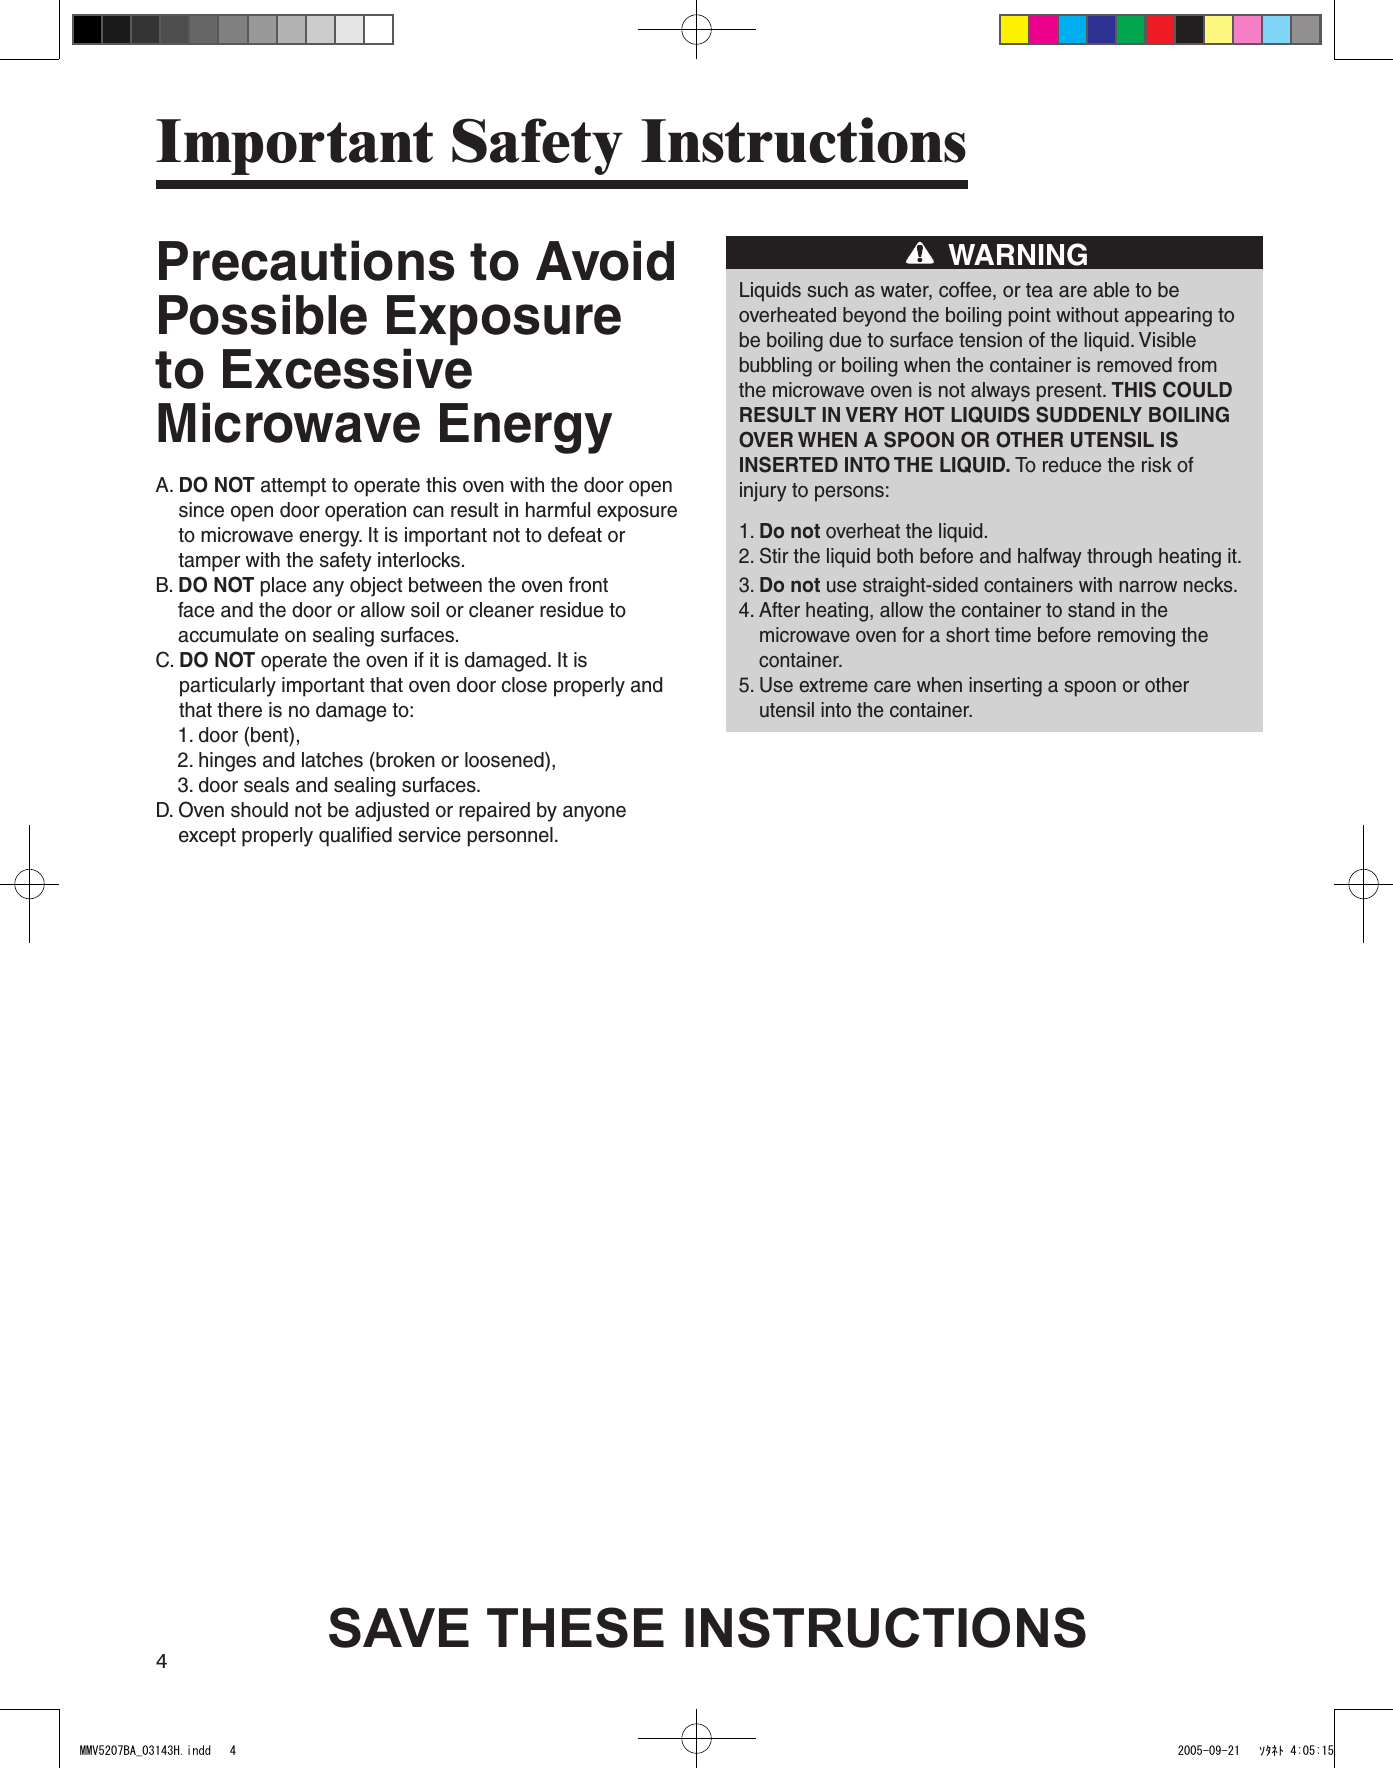 4Precautions to Avoid Possible Exposure to Excessive Microwave EnergyA.  DO NOT attempt to operate this oven with the door open since open door operation can result in harmful exposure to microwave energy. It is important not to defeat or tamper with the safety interlocks.B.  DO NOT place any object between the oven front face and the door or allow soil or cleaner residue to accumulate on sealing surfaces.C.  DO NOT operate the oven if it is damaged. It is particularly important that oven door close properly and that there is no damage to:    1. door (bent),    2. hinges and latches (broken or loosened),    3. door seals and sealing surfaces.D.  Oven should not be adjusted or repaired by anyone except properly qualified service personnel.WARNINGLiquids such as water, coffee, or tea are able to beoverheated beyond the boiling point without appearing tobe boiling due to surface tension of the liquid. Visiblebubbling or boiling when the container is removed fromthe microwave oven is not always present. THIS COULDRESULT IN VERY HOT LIQUIDS SUDDENLY BOILINGOVER WHEN A SPOON OR OTHER UTENSIL ISINSERTED INTO THE LIQUID. To reduce the risk ofinjury to persons:1. Do not overheat the liquid.2.  Stir the liquid both before and halfway through heating it.3.  Do not use straight-sided containers with narrow necks.4.  After heating, allow the container to stand in the microwave oven for a short time before removing the container.5.  Use extreme care when inserting a spoon or other utensil into the container.Important Safety InstructionsSAVE THESE INSTRUCTIONSMMV5207BA_03143H.indd   4 2005-09-21   ｿﾀﾈﾄ 4:05:15